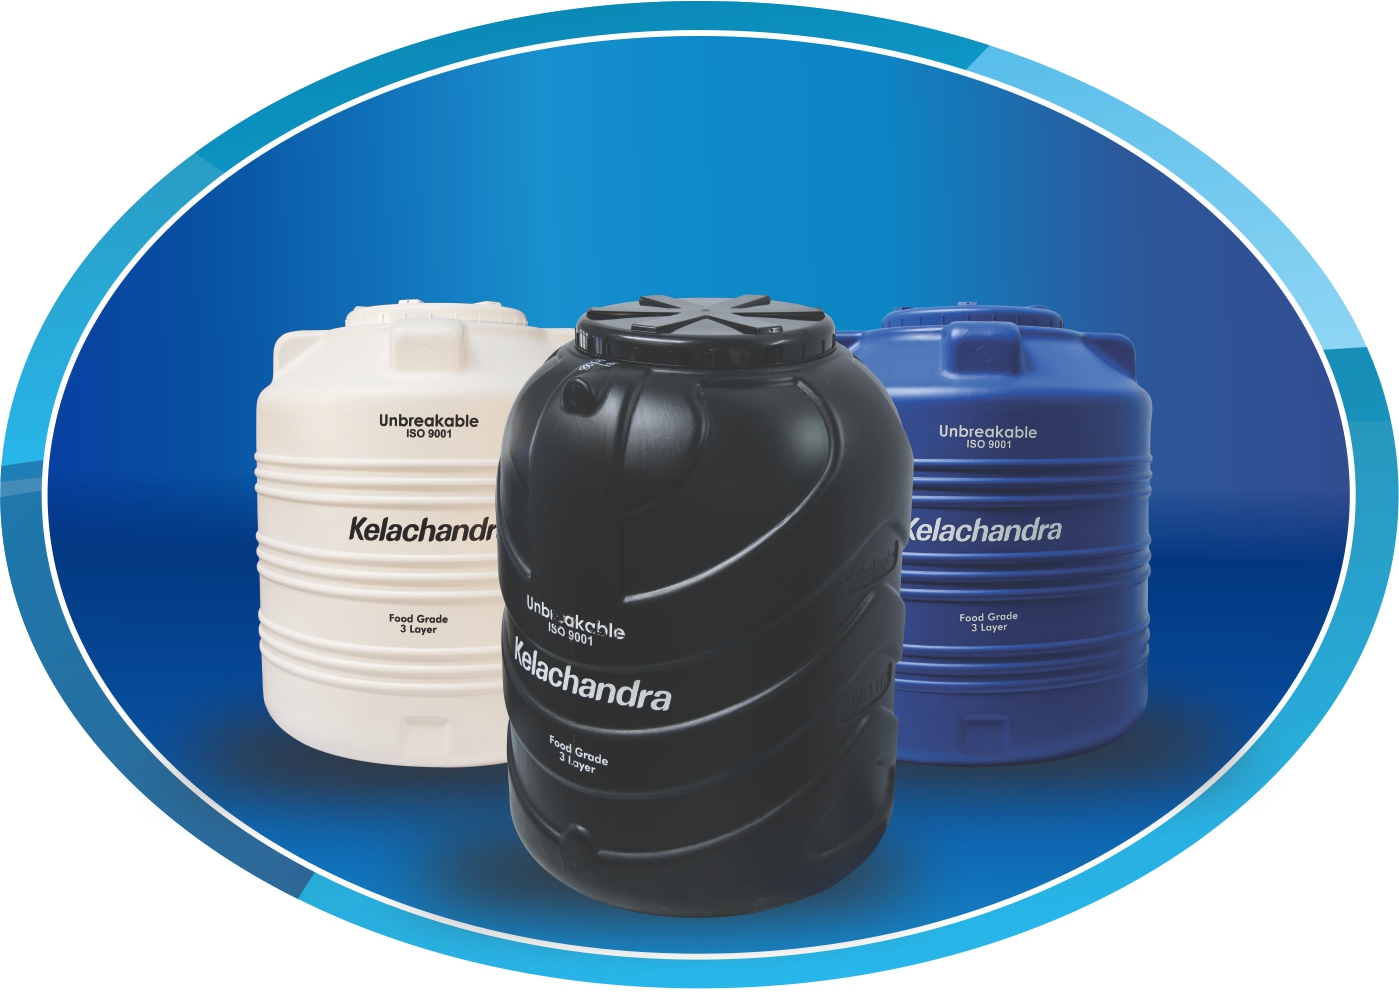 HDPE Over Head Storage Water Tank Manufactures, Suppliers In Kerala, Kottayam, India